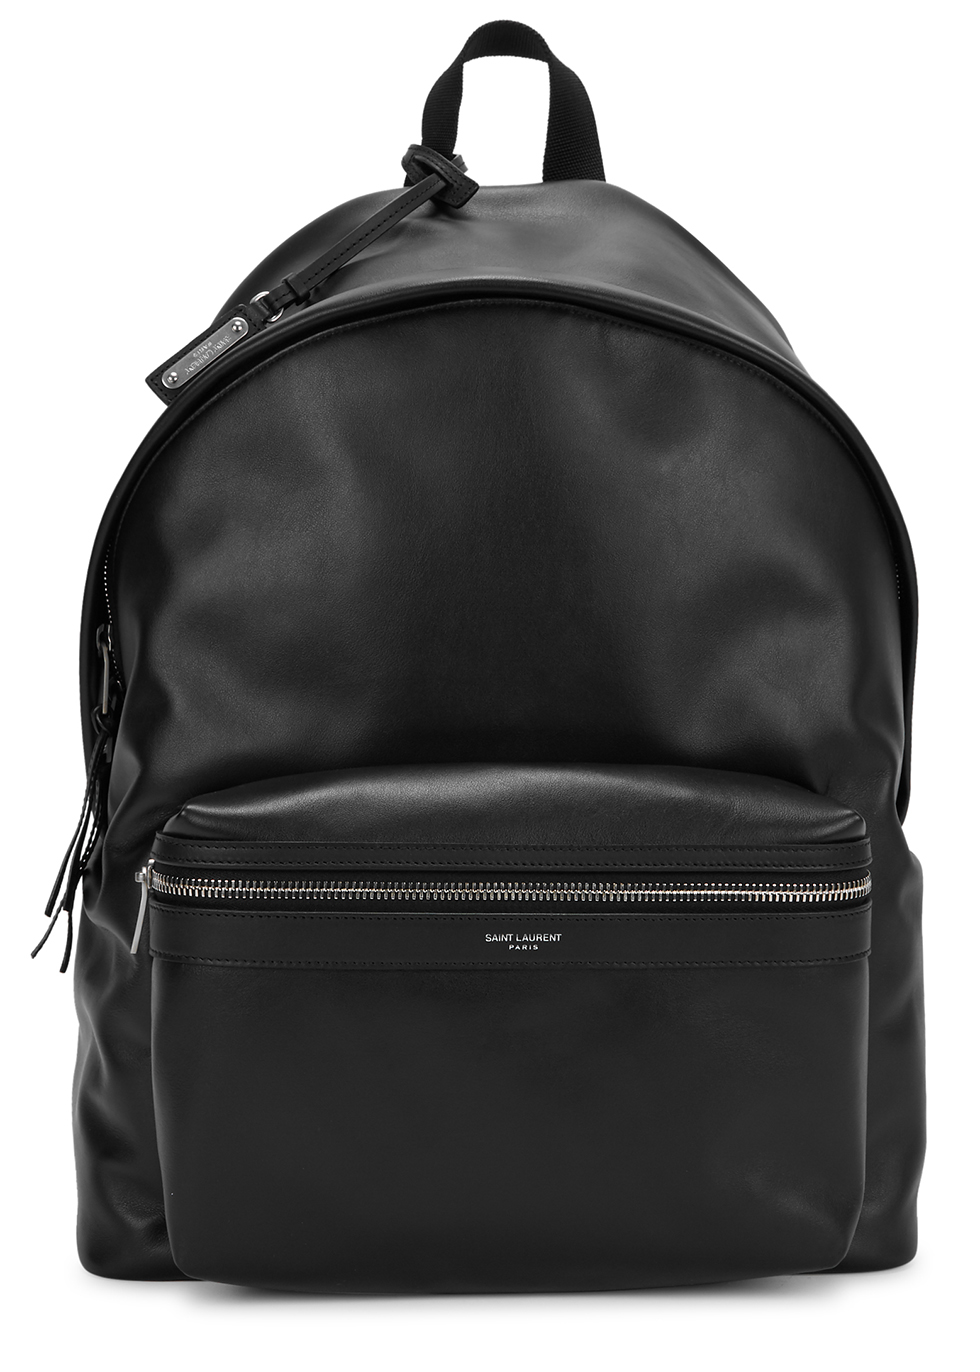 City black leather backpack